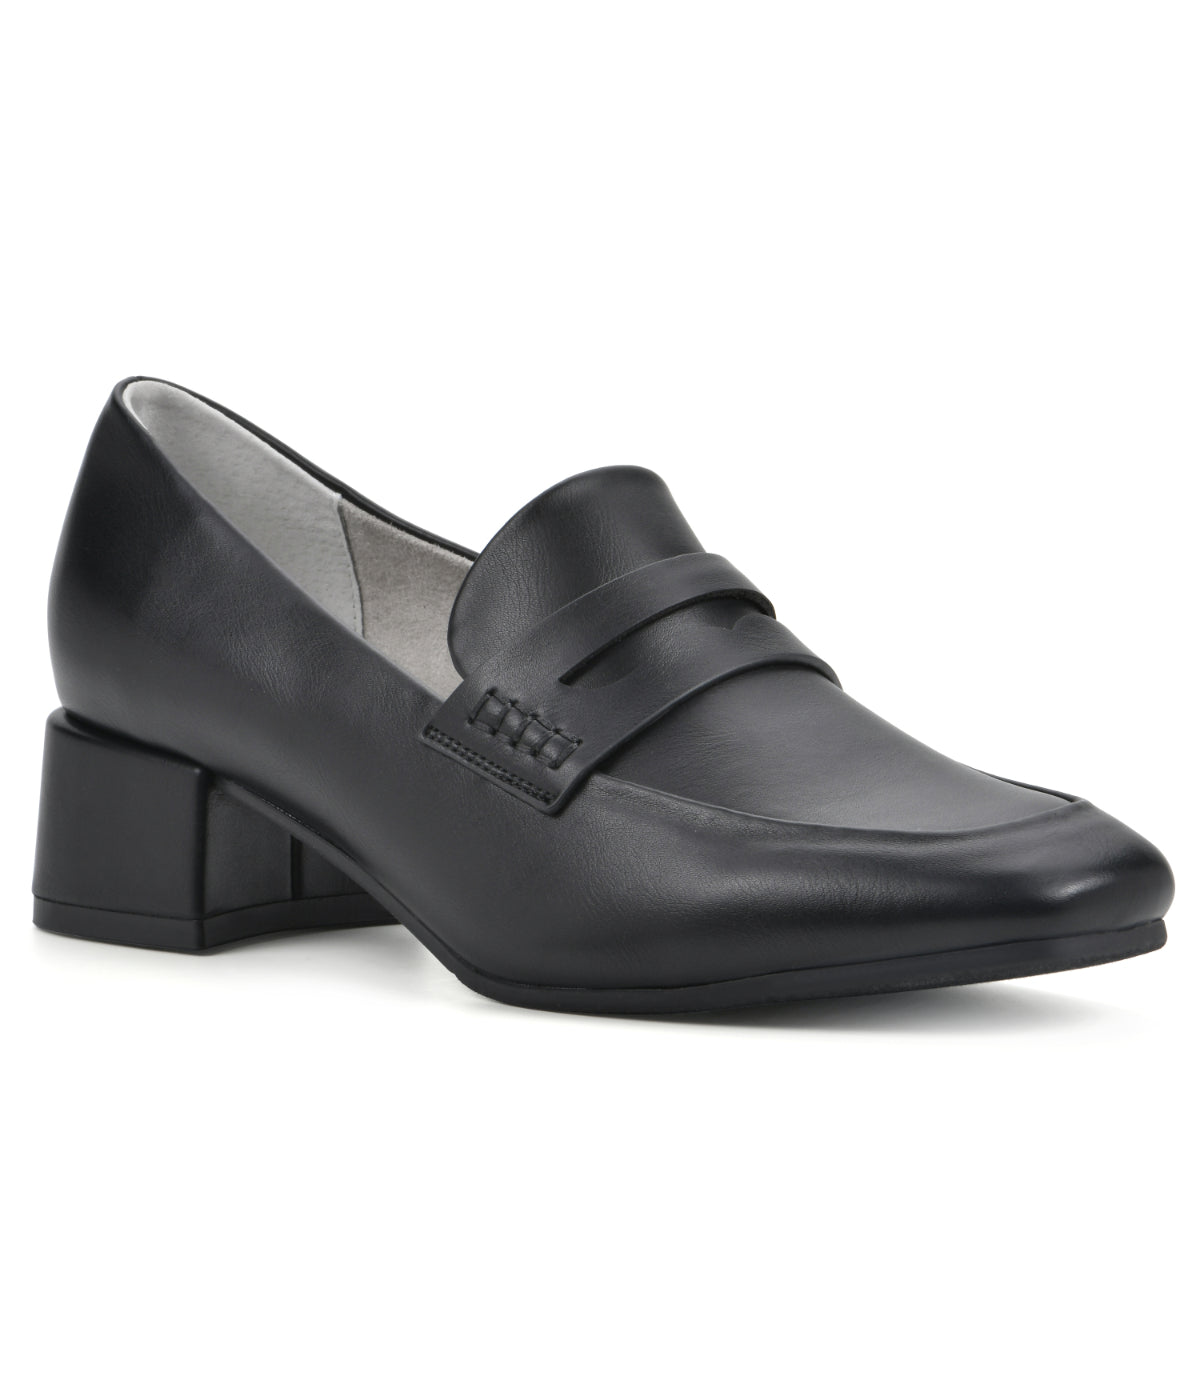 Quiana Dress Loafers Black/Smooth